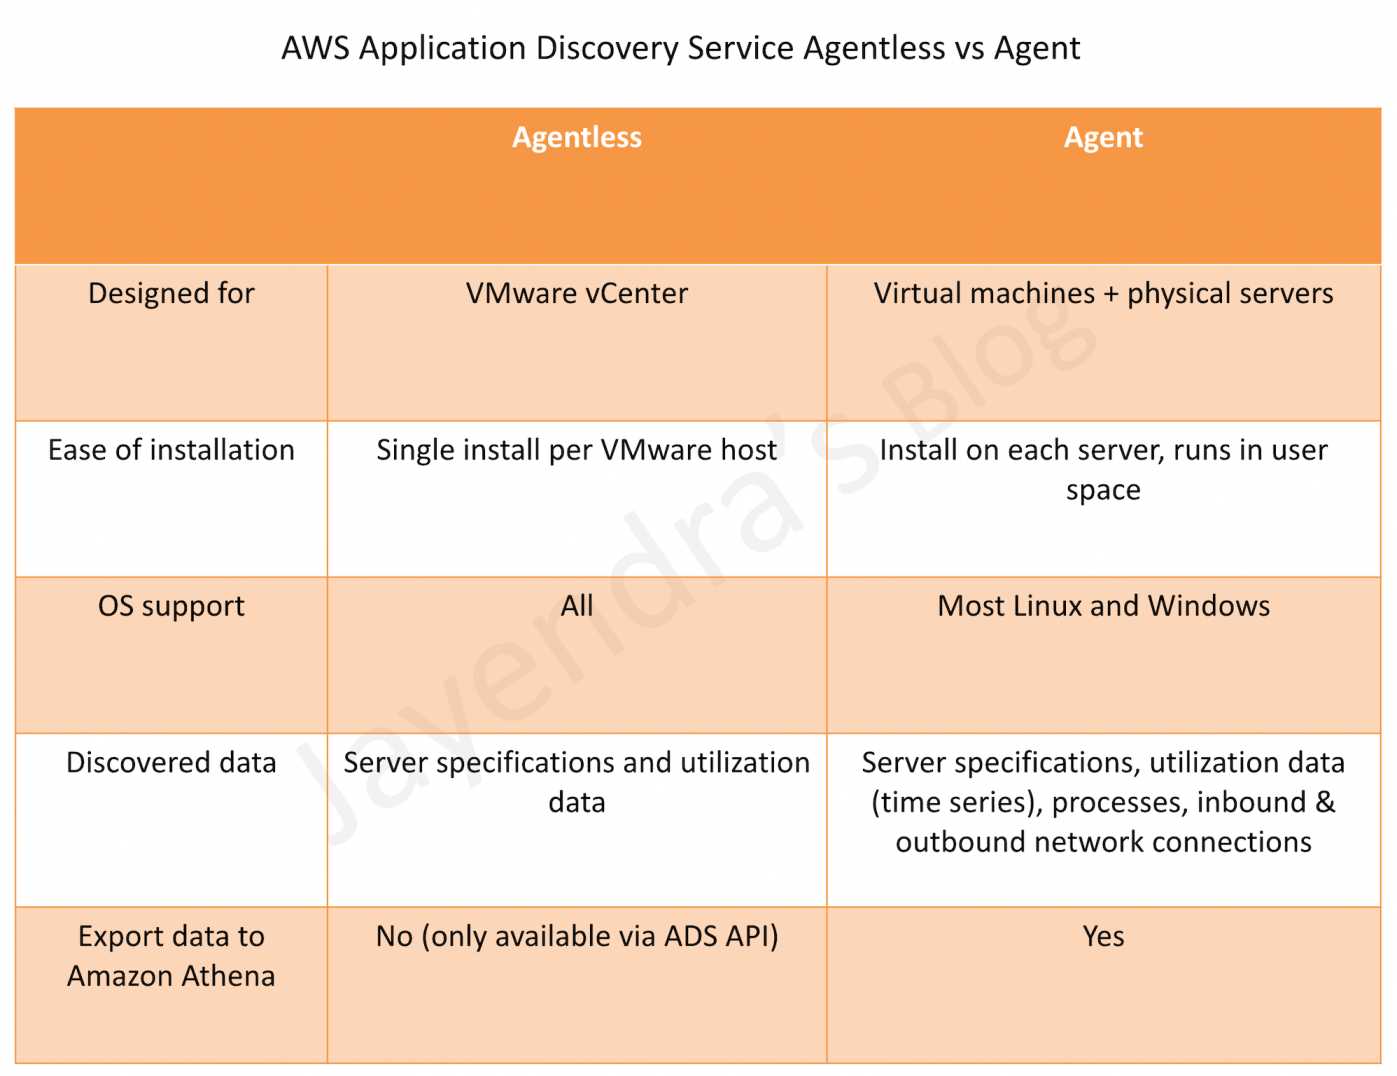 AWS Application Discovery Service Agentless vs Agent